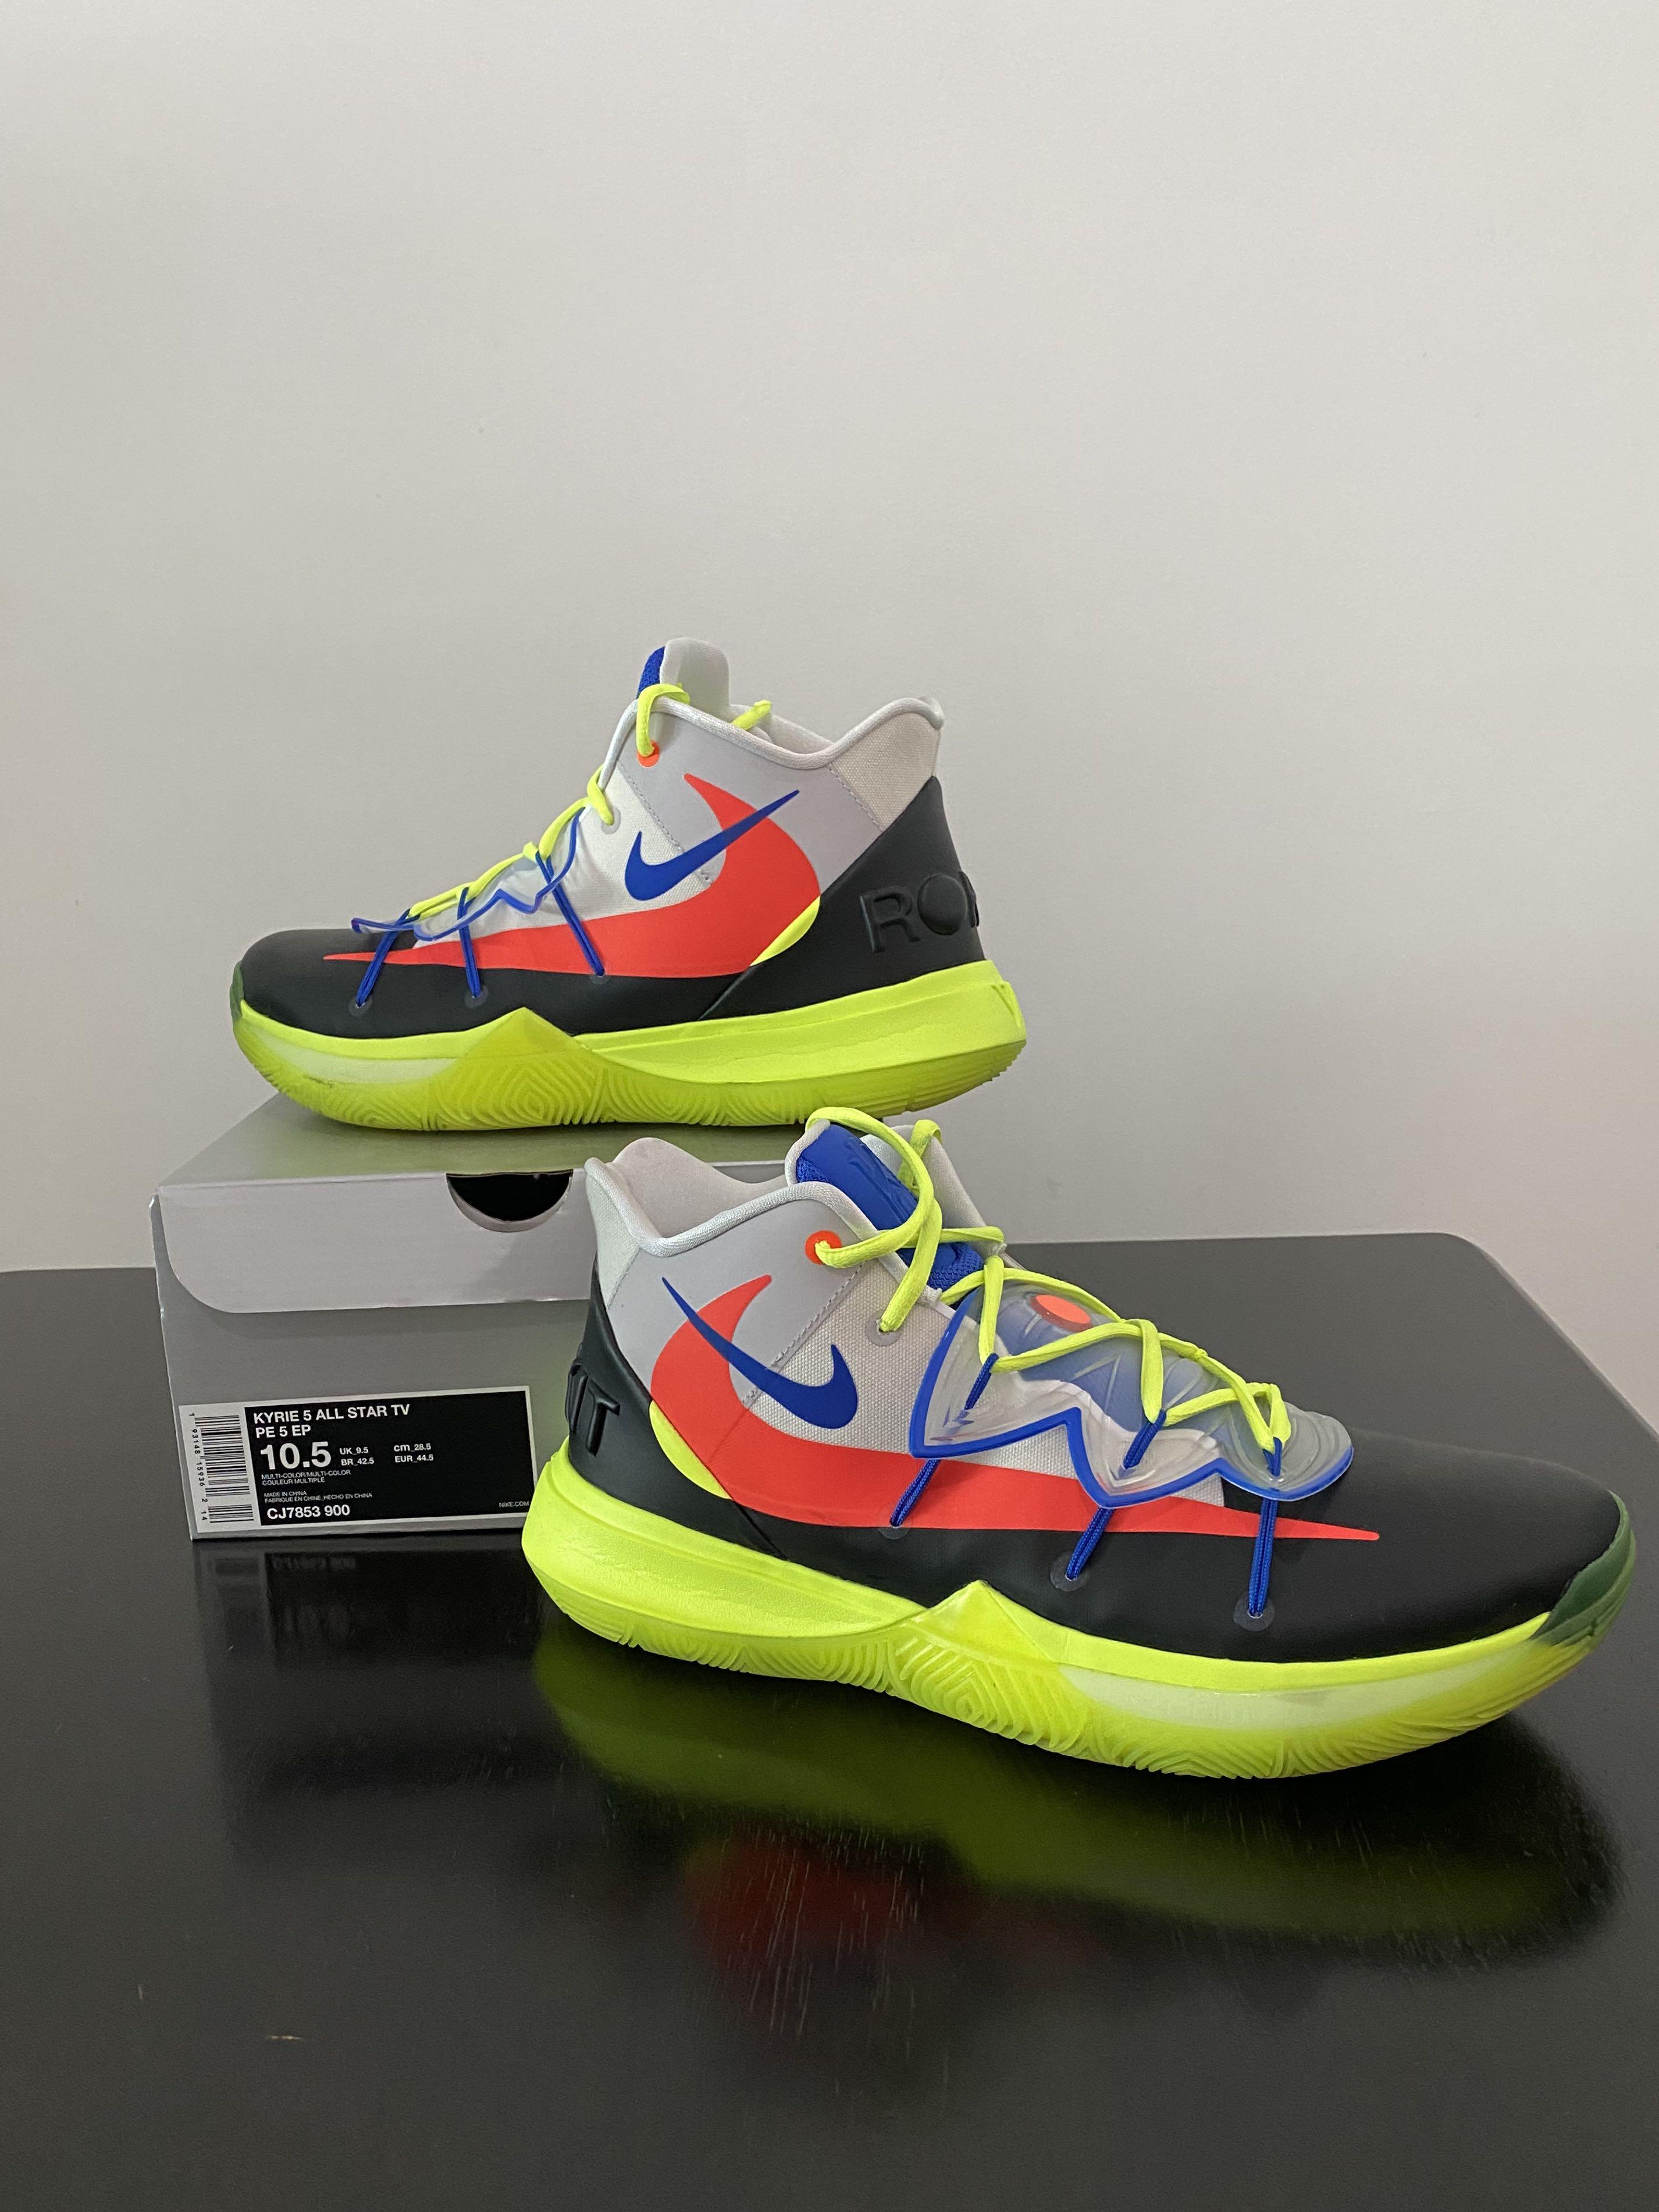 Nike Kyrie 5 PE Neon Blends For Sale Cheap UA Curry 7